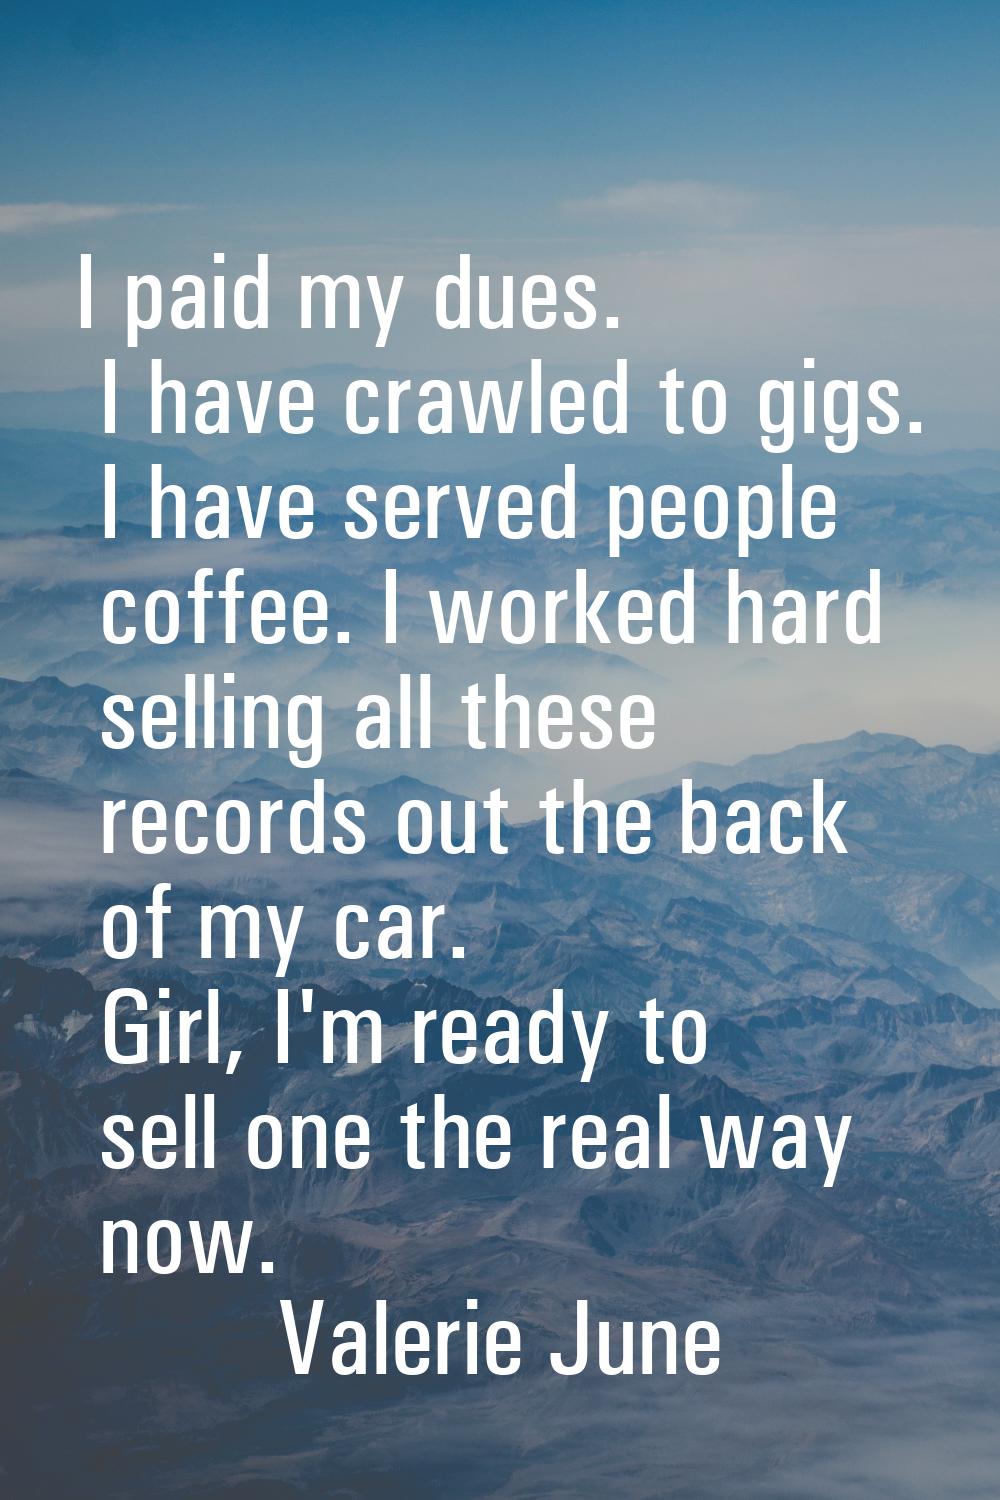 I paid my dues. I have crawled to gigs. I have served people coffee. I worked hard selling all thes